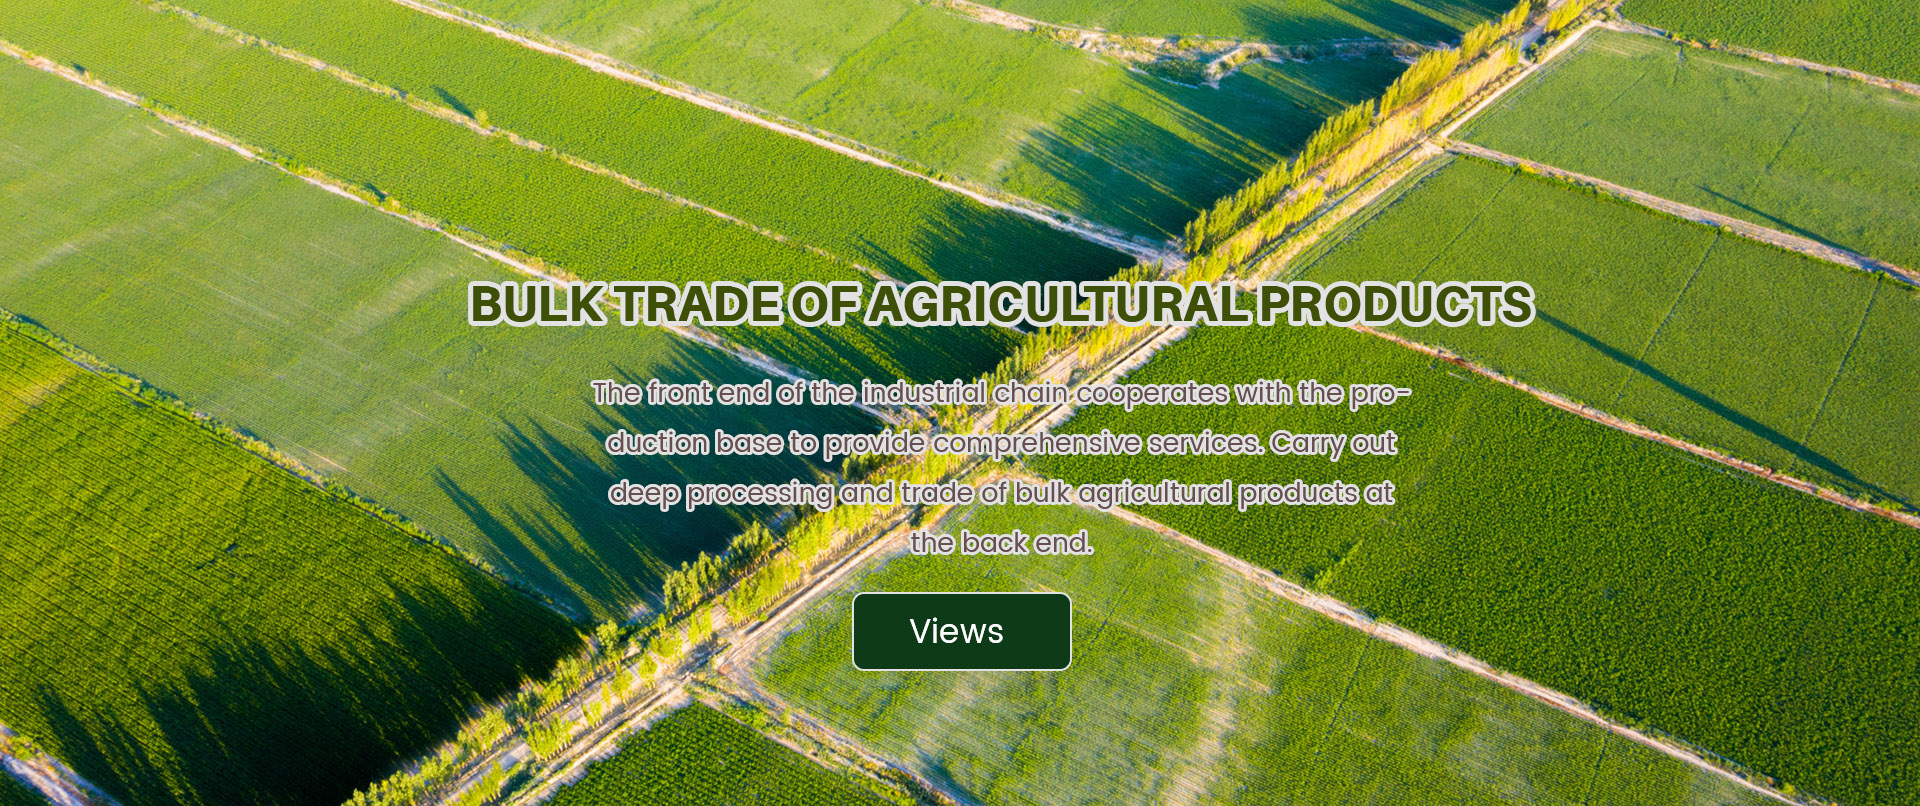 Bulk trade of agricultural products